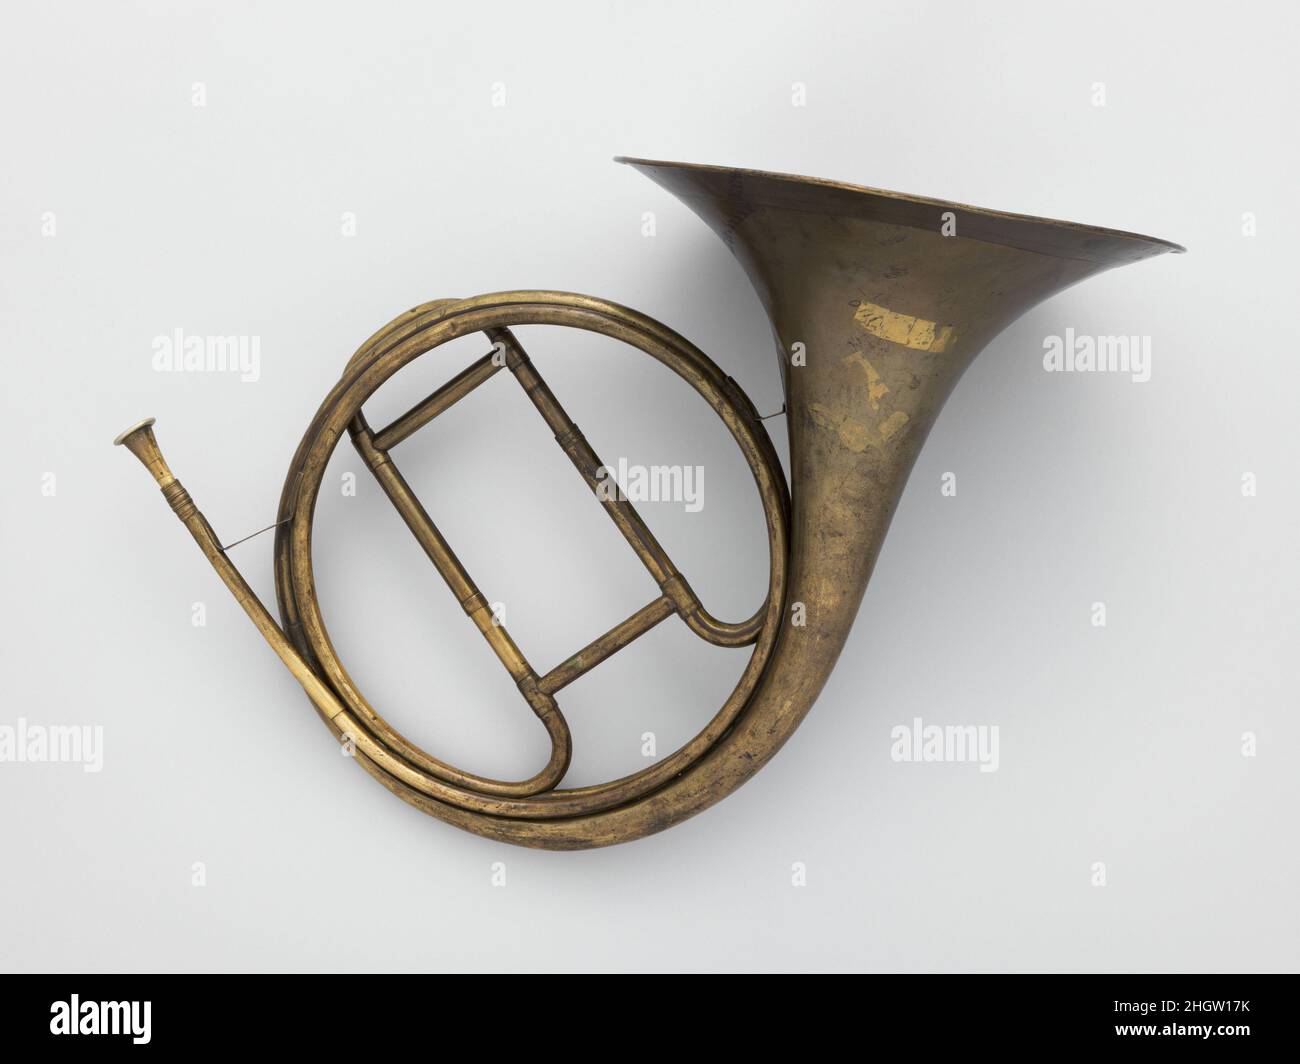 Orchestral Horn ca. 1830 Unknown. Orchestral Horn. German. ca. 1830. brass. Markneukirchen or vicinity, Germany. Aerophone-Lip Vibrated-horn Stock Photo